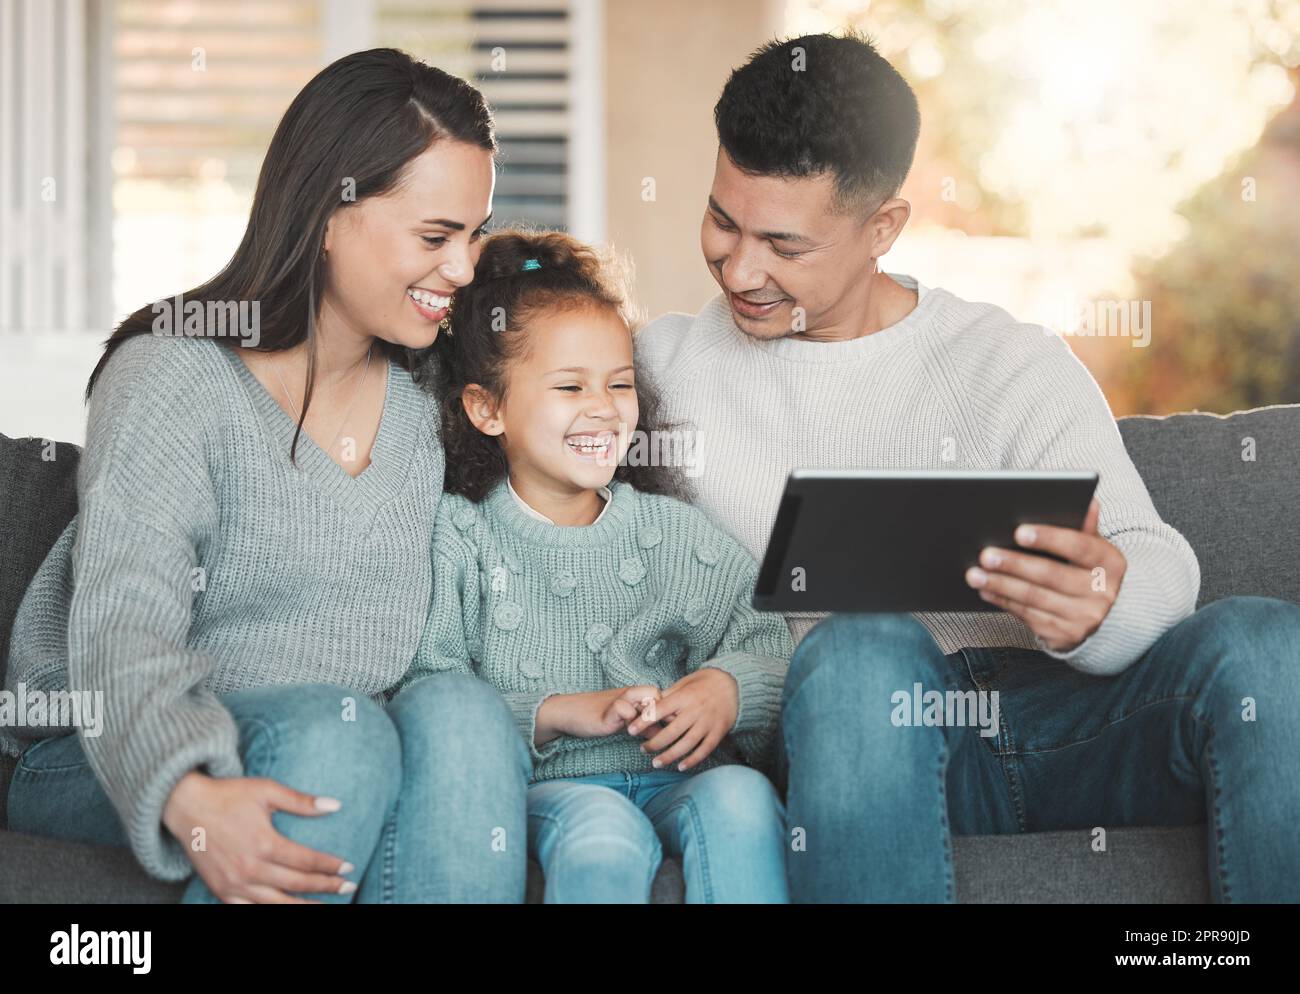 My friends and family are my support system. a young family happily bonding while using a digital tablet together on the sofa at home. Stock Photo